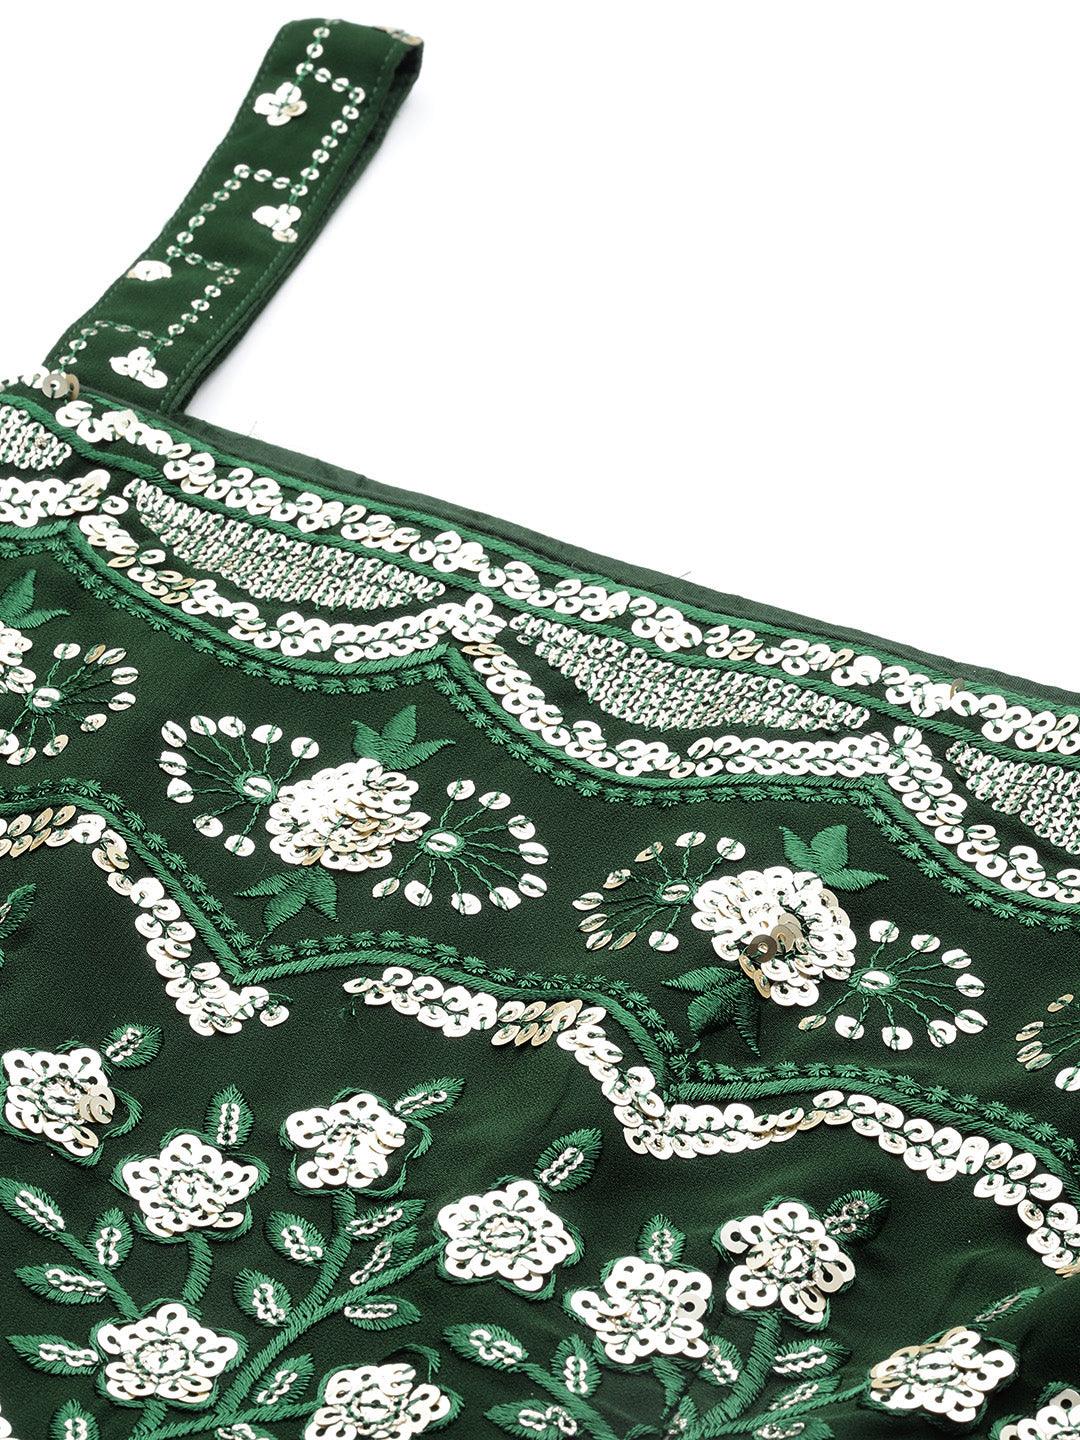 Green Embroidered Georgette A-Line Kurti With Palazzos & Dupatta - Libas